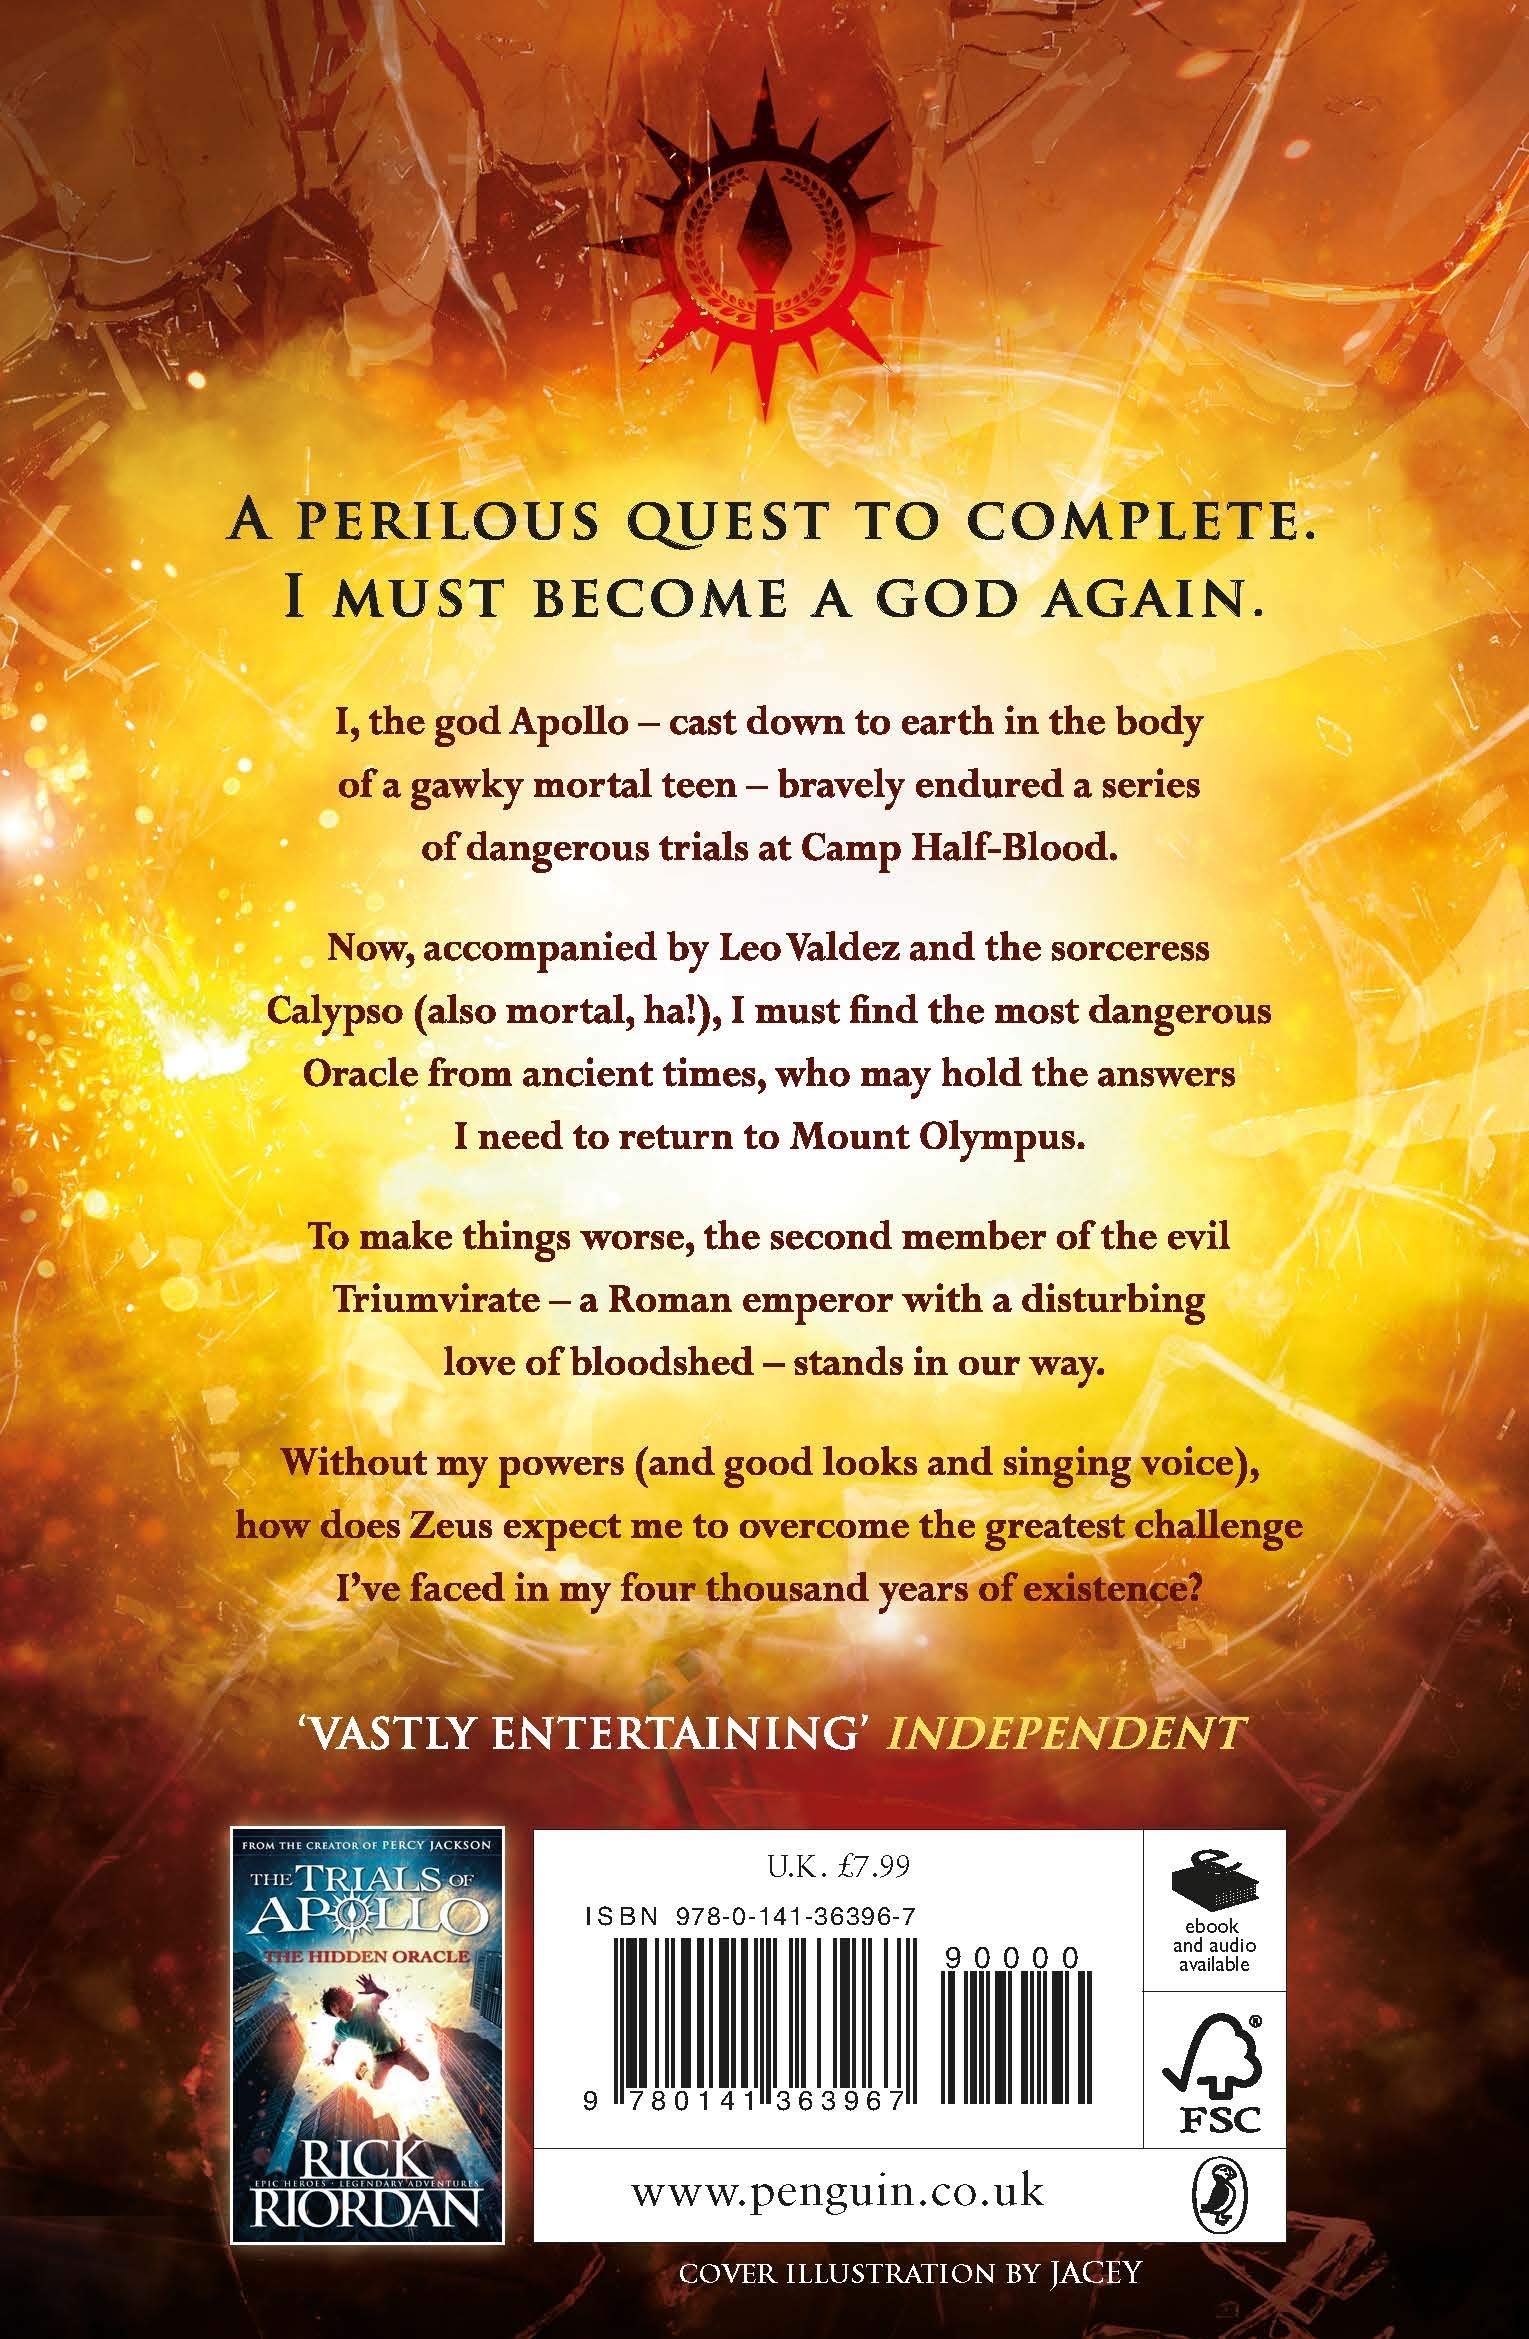 Return to Percy Jackson's World - The trials of Apollo (2): The Dark Prophecy